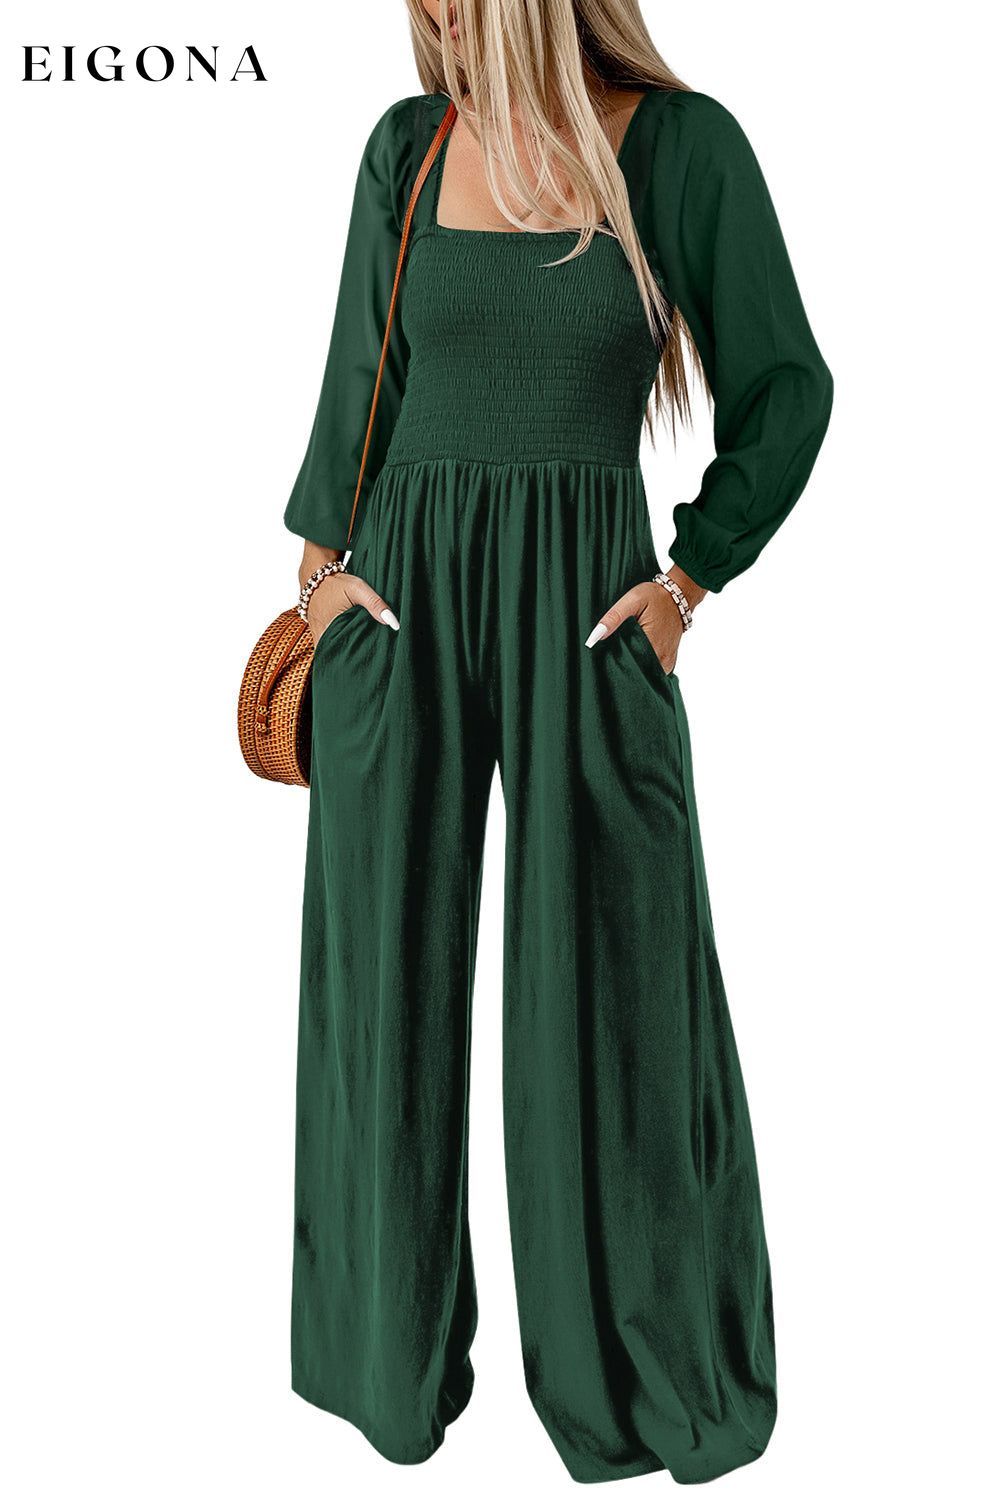 Green Smocked Square Neck Long Sleeve Wide Leg Jumpsuit All In Stock Best Sellers clothes Craft Smocked Occasion Daily pants Print Solid Color Season Fall & Autumn Silhouette Wide Leg Style Southern Belle wide leg jumpsuit